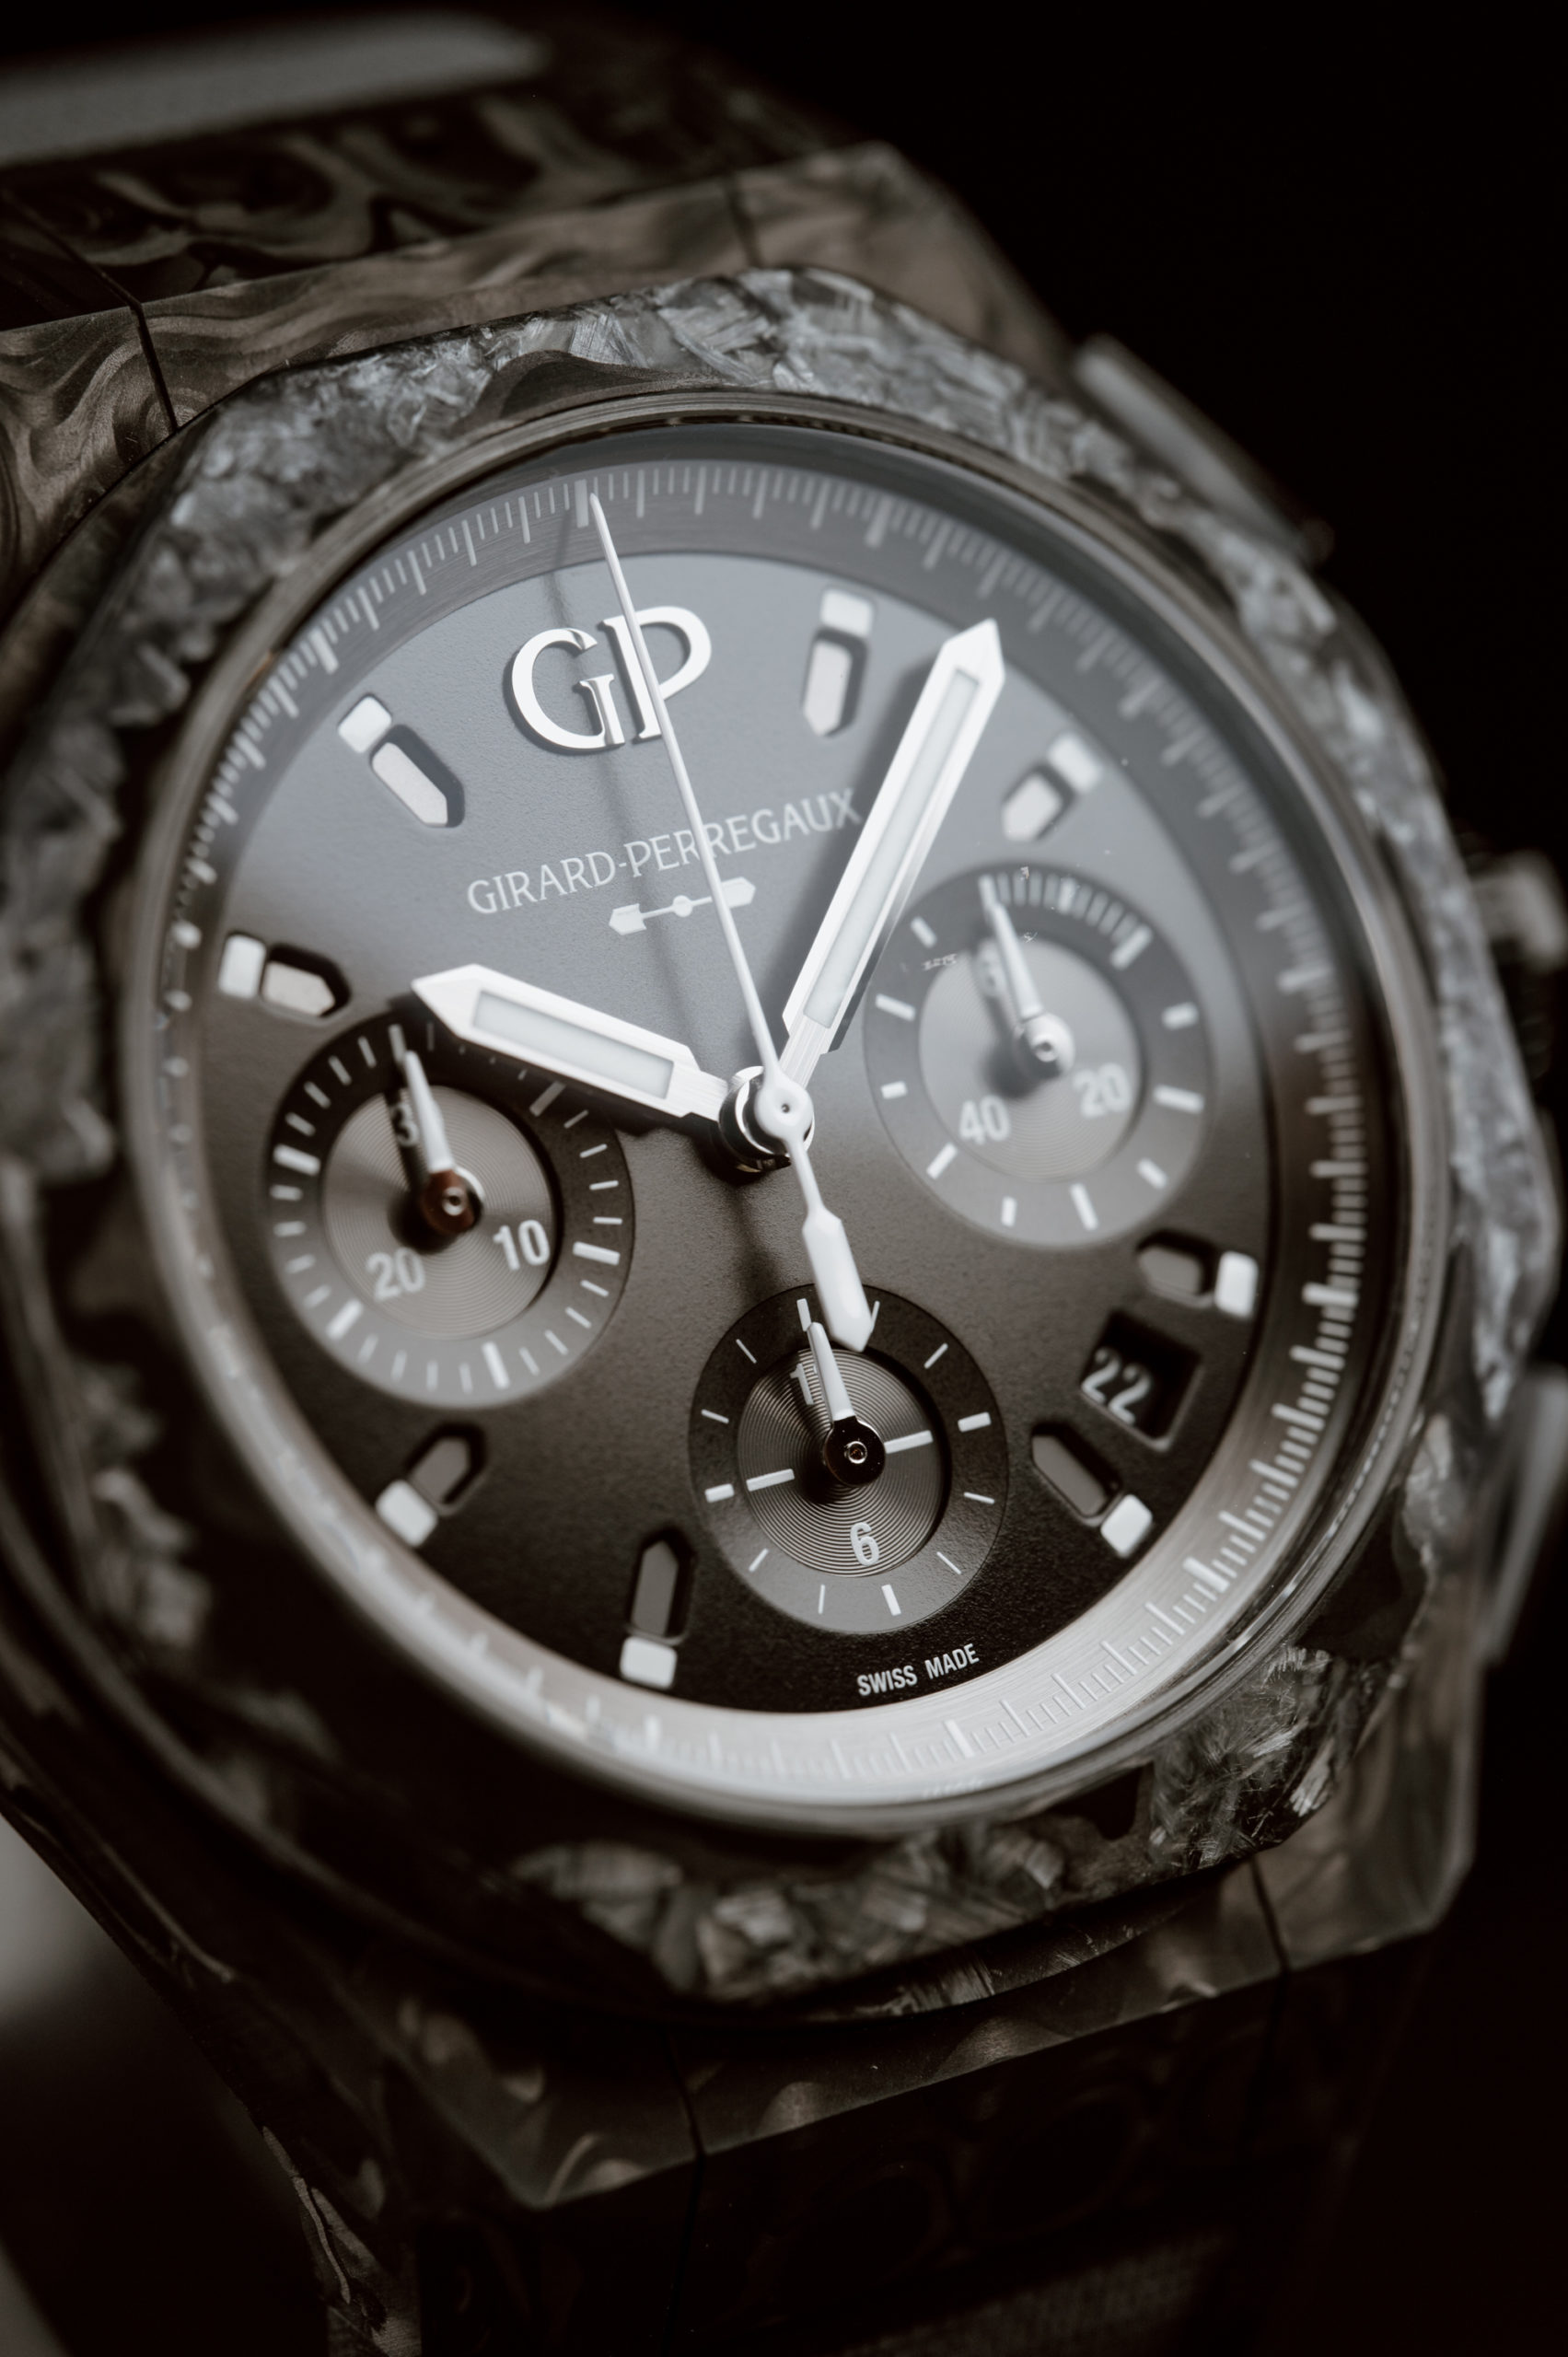 Girard-Perregaux Releases Rock-Solid Addition To Laureato Watch Line